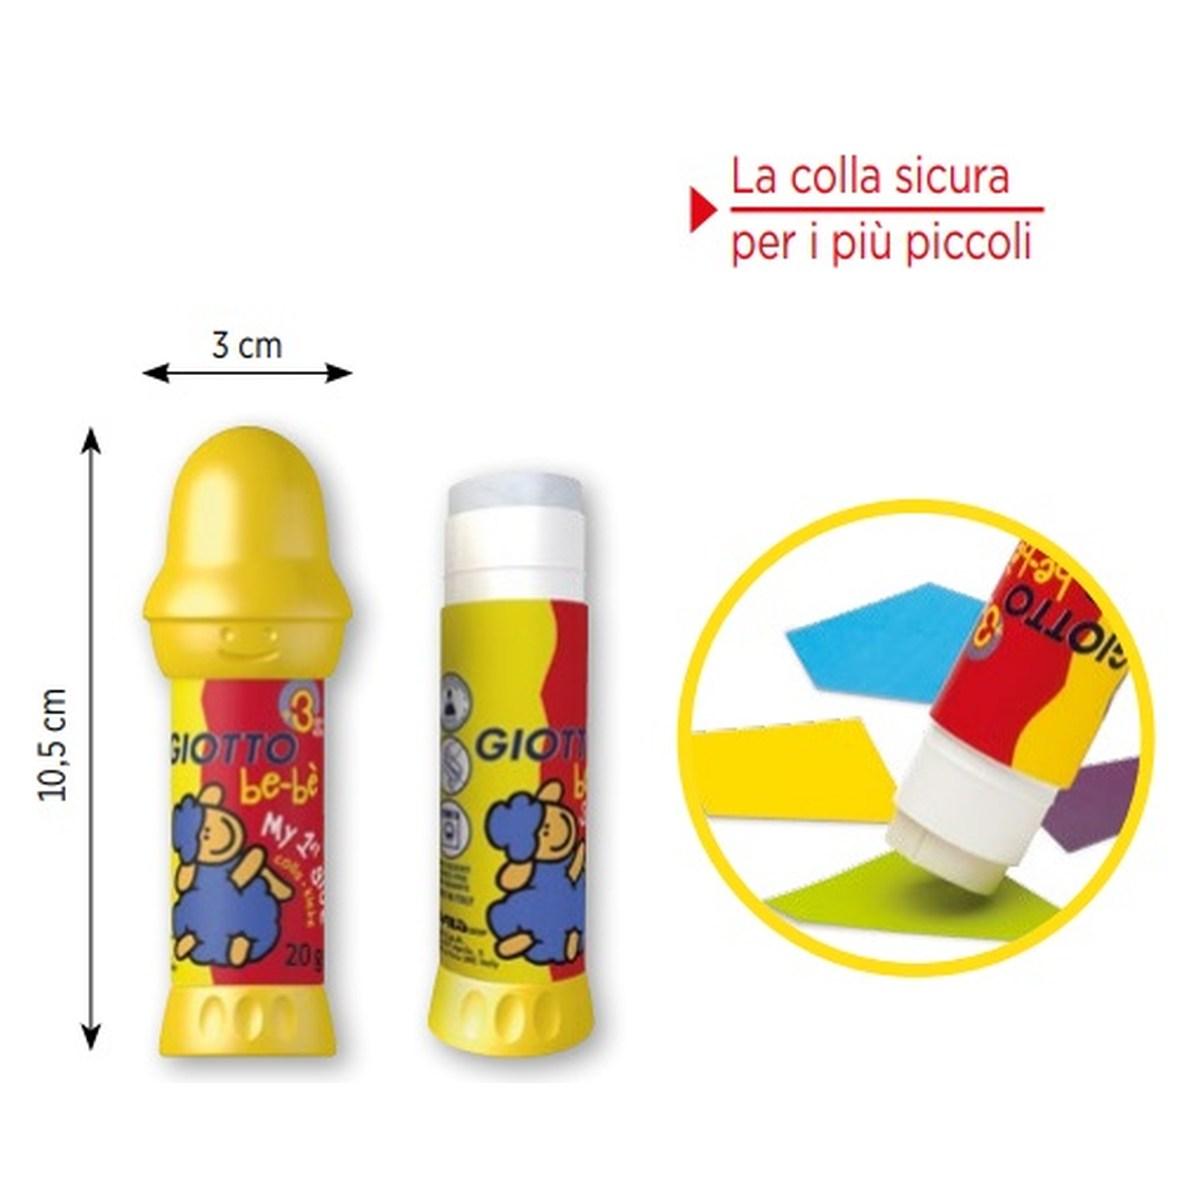 COLLA STICK 20gr GIOTTO BE-BE'